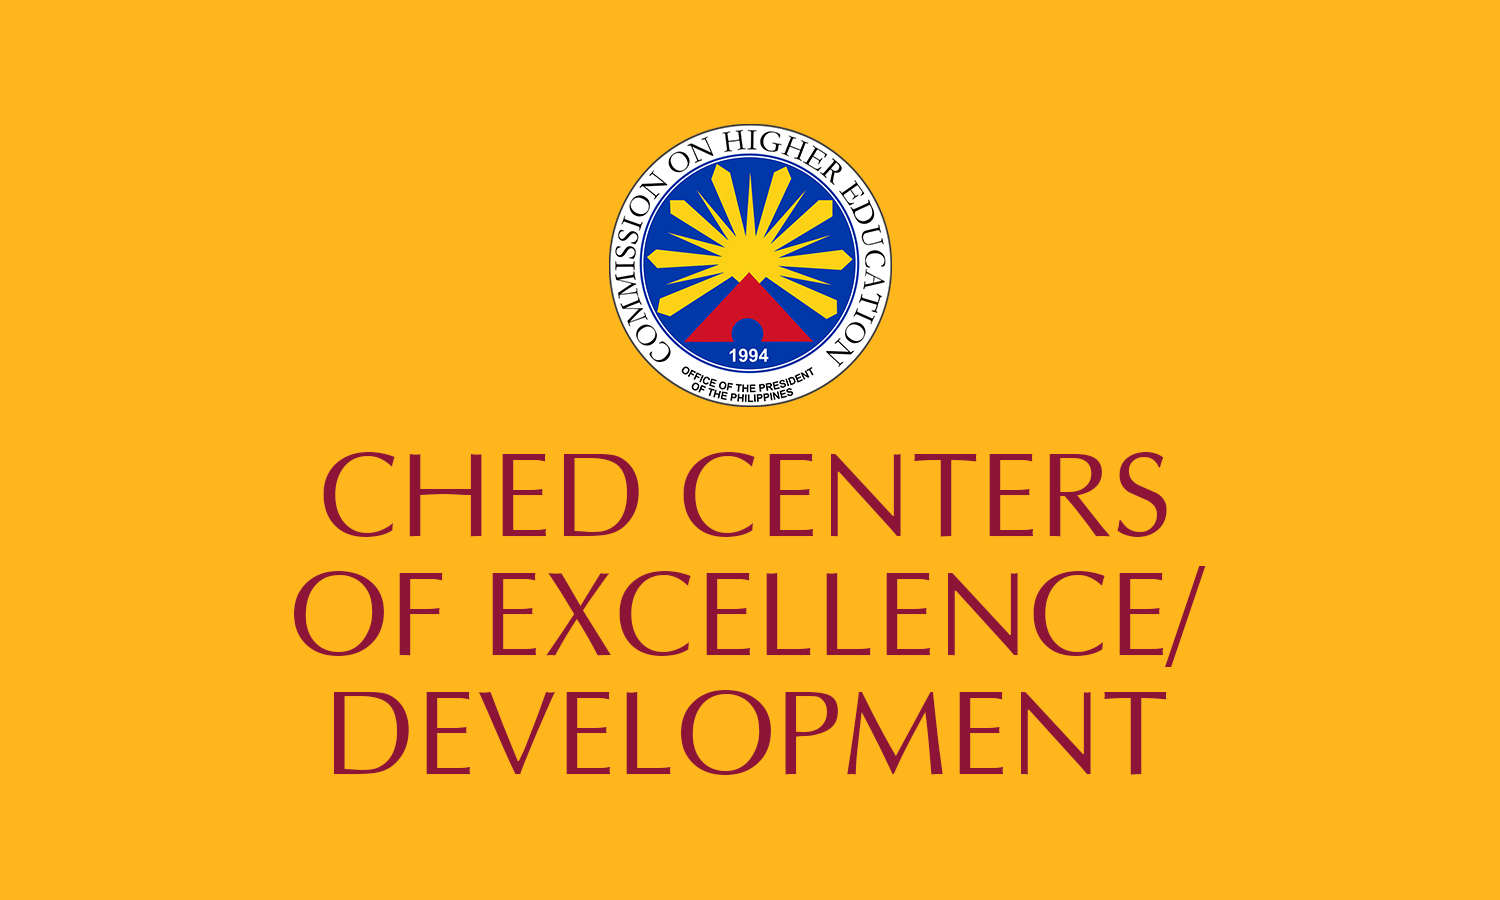 3 CHED - DEV'T